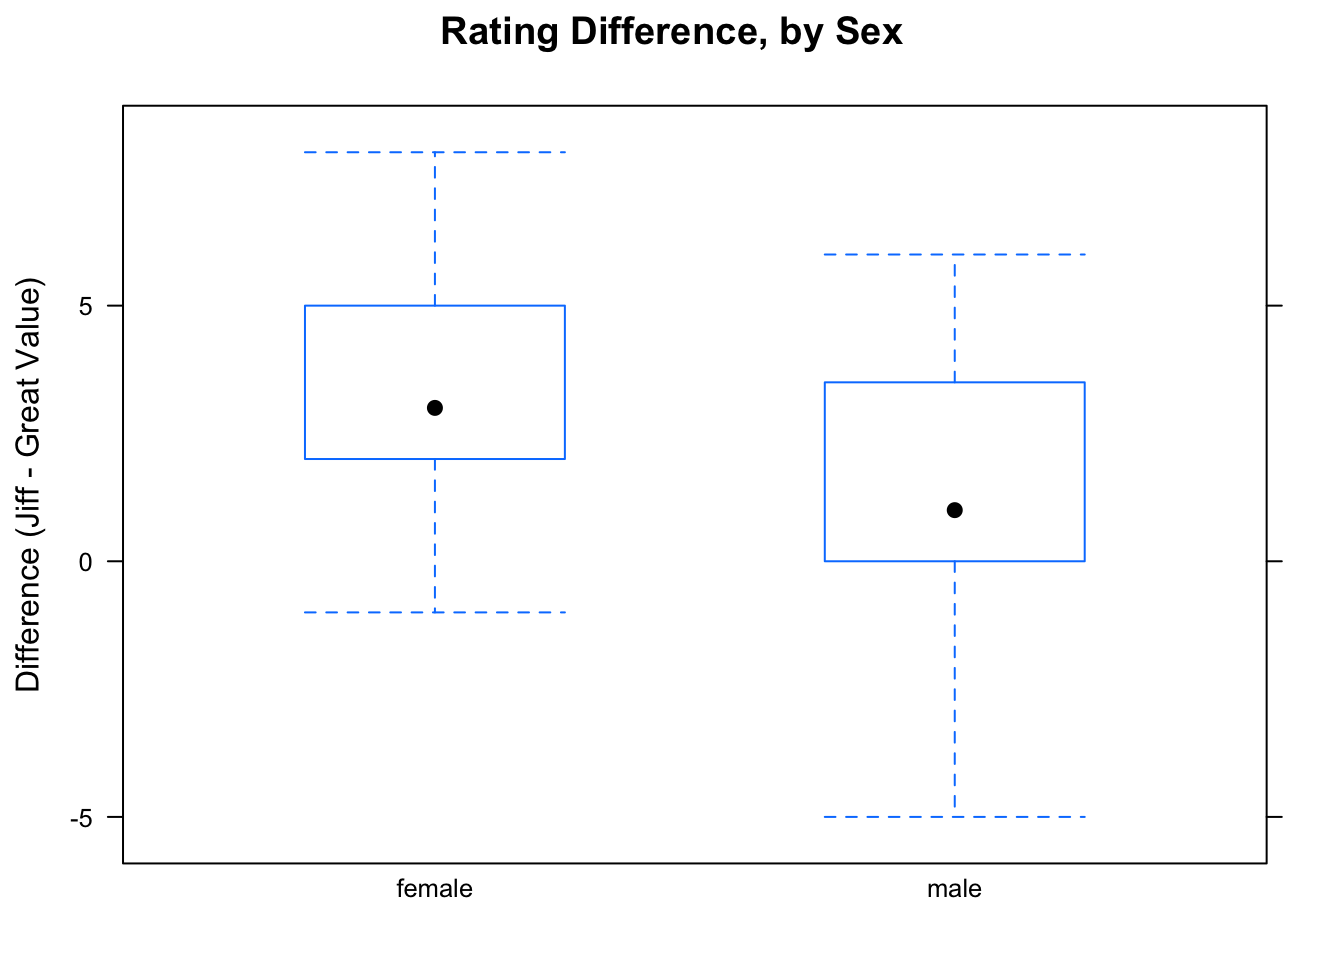 Rating Differences for Males and for Females